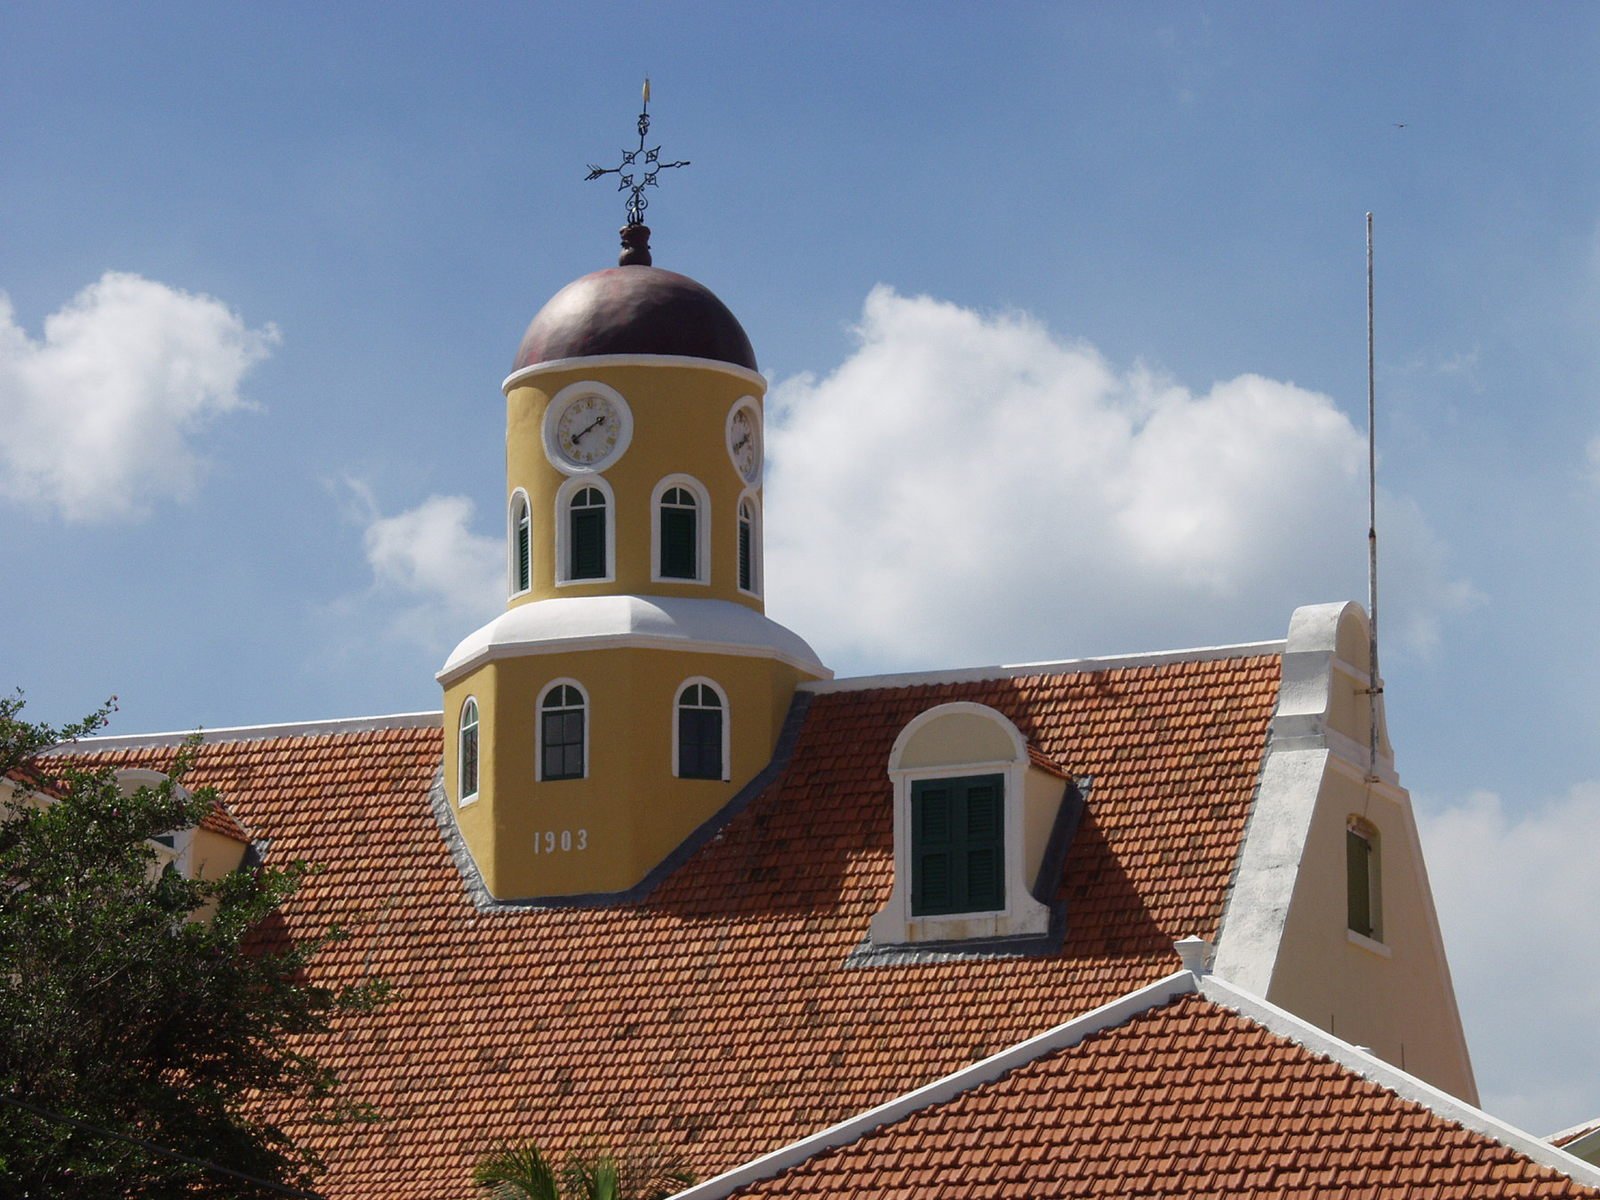 an ornate yellow and white church building with red roof